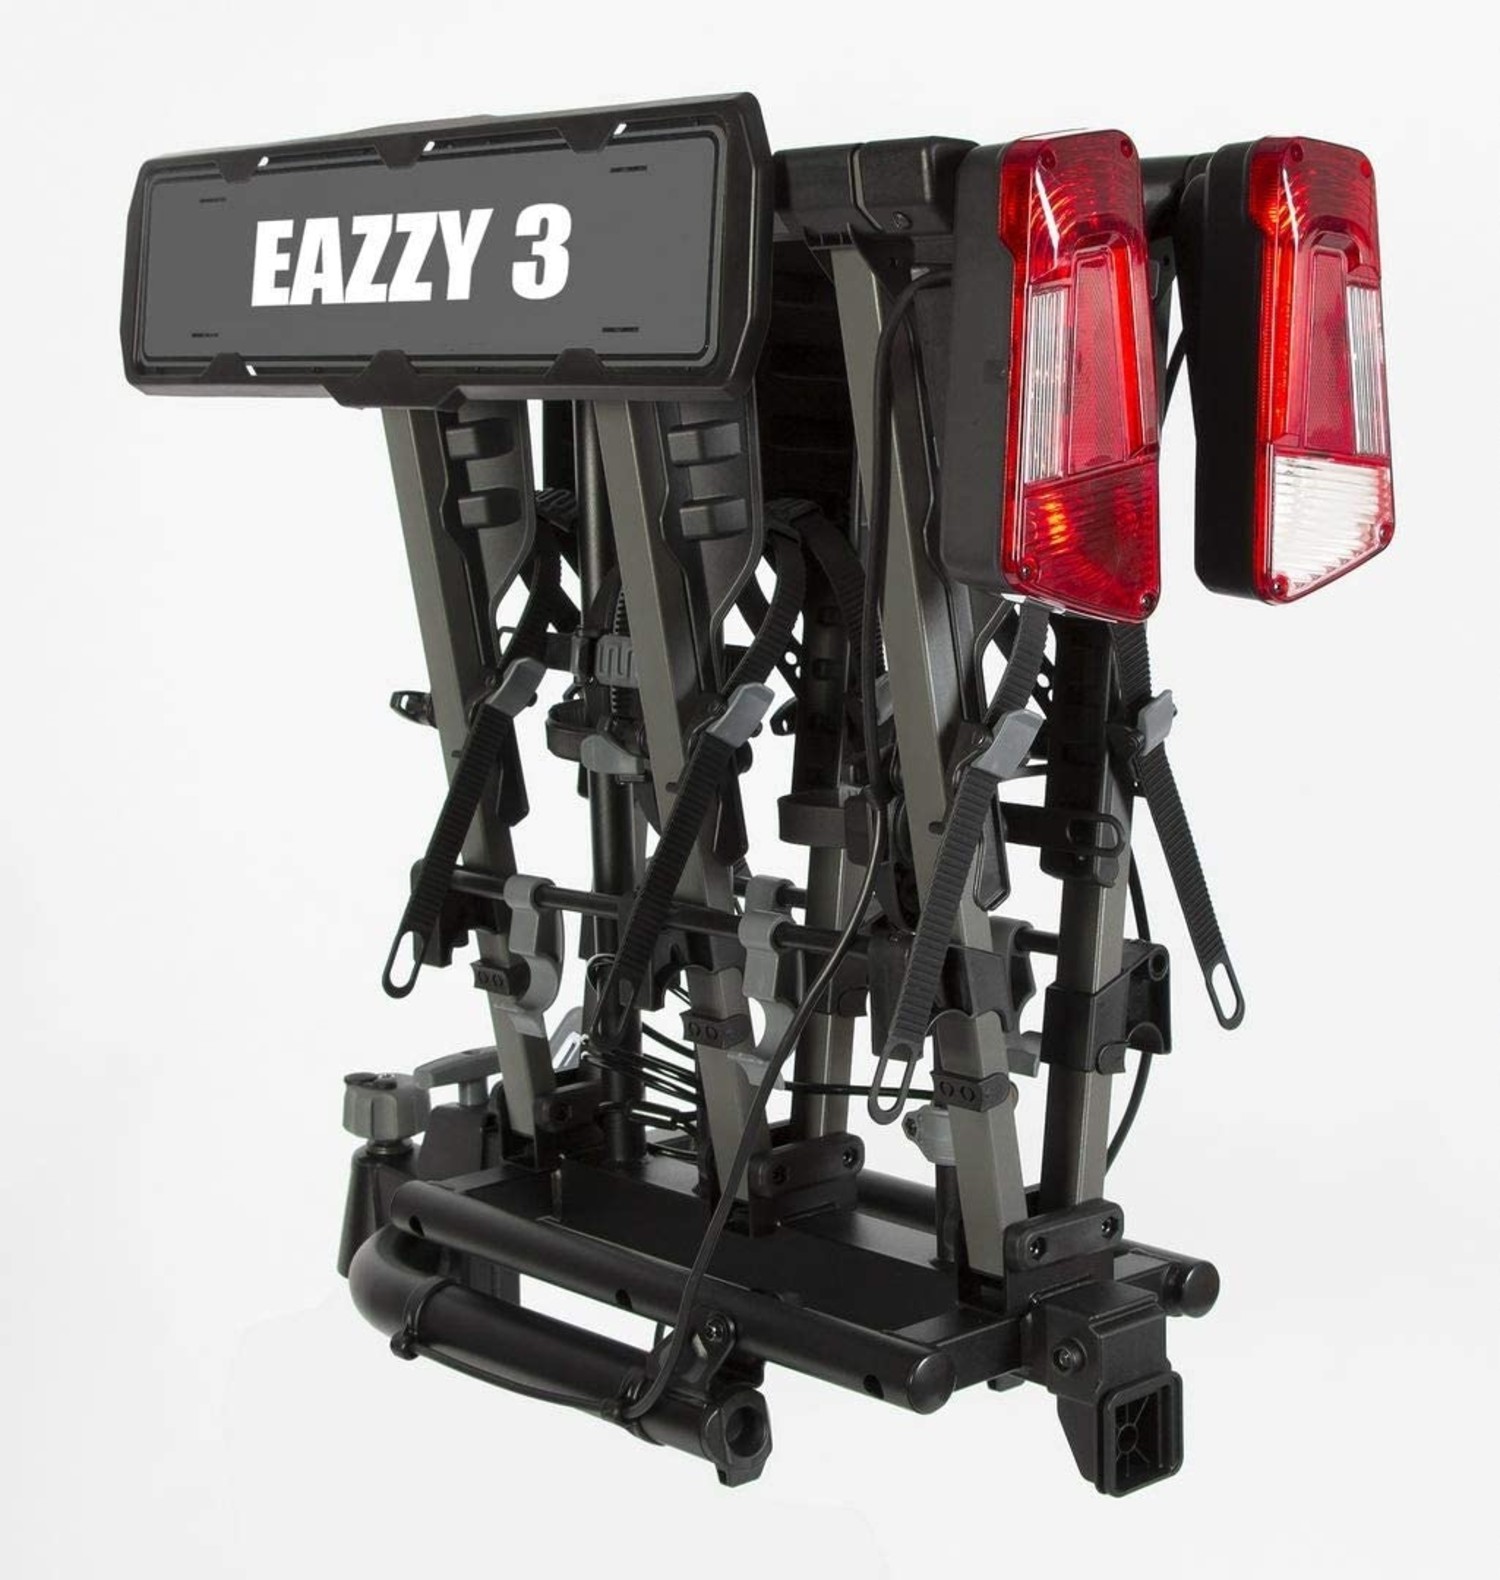 buzzrack eazzy 2 review